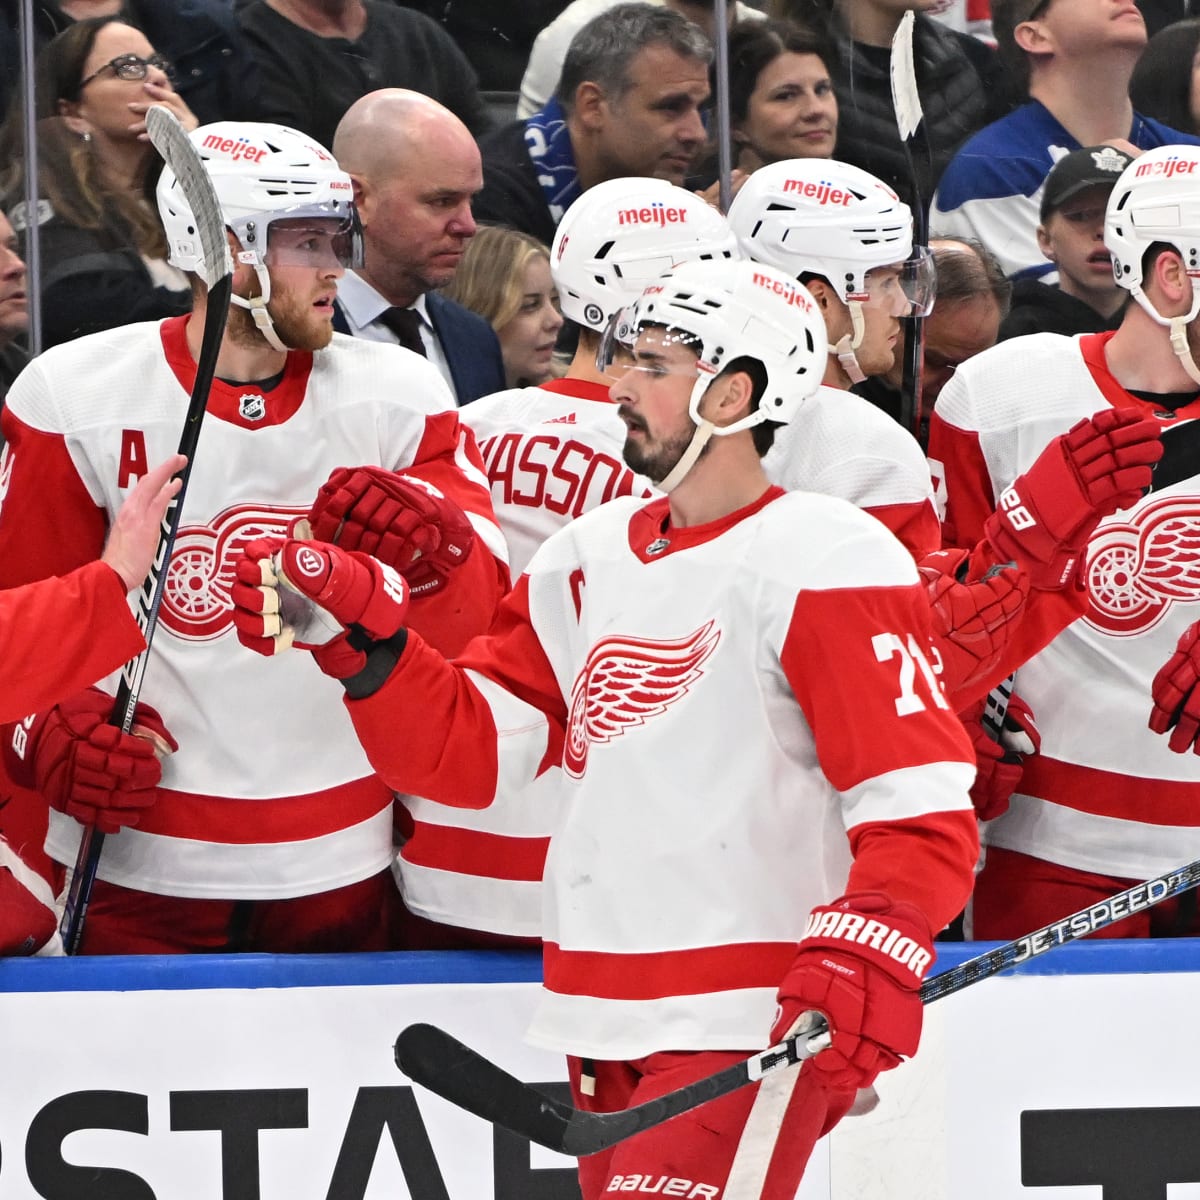 Detroit Red Wings 2023-24 roster and lineup predictions